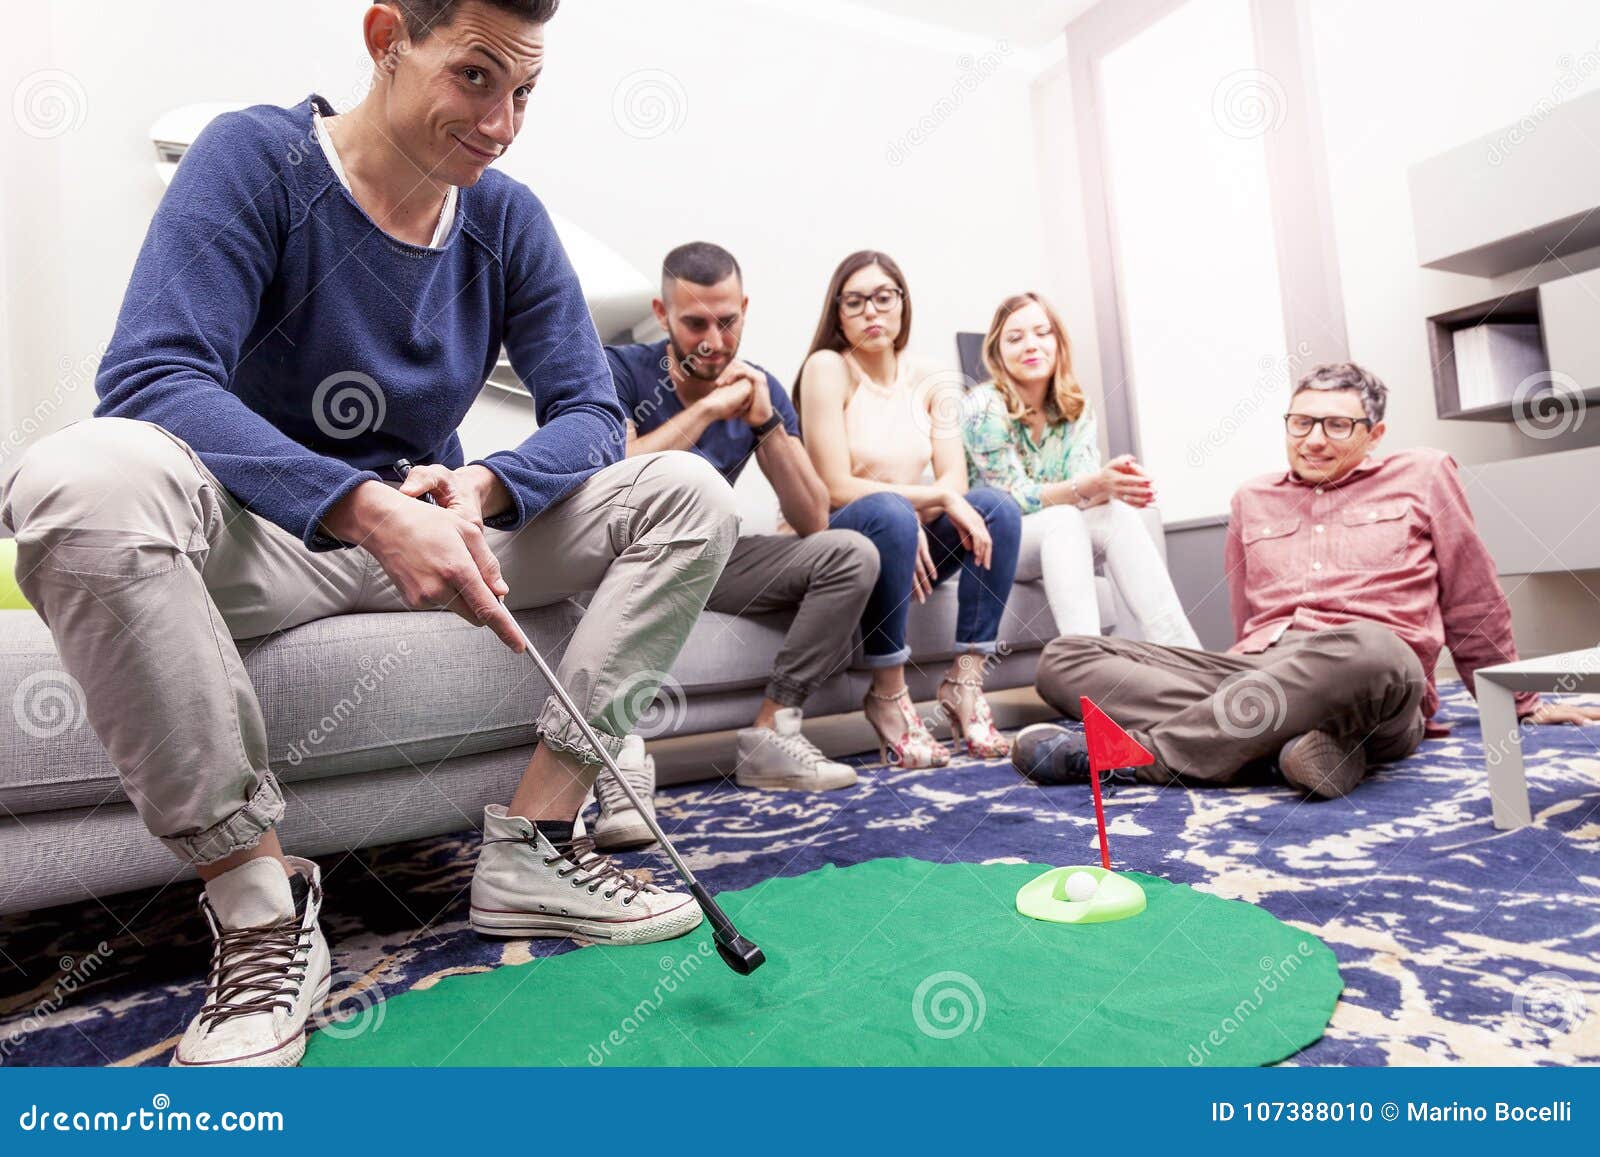 Play Golf In Your Living Room